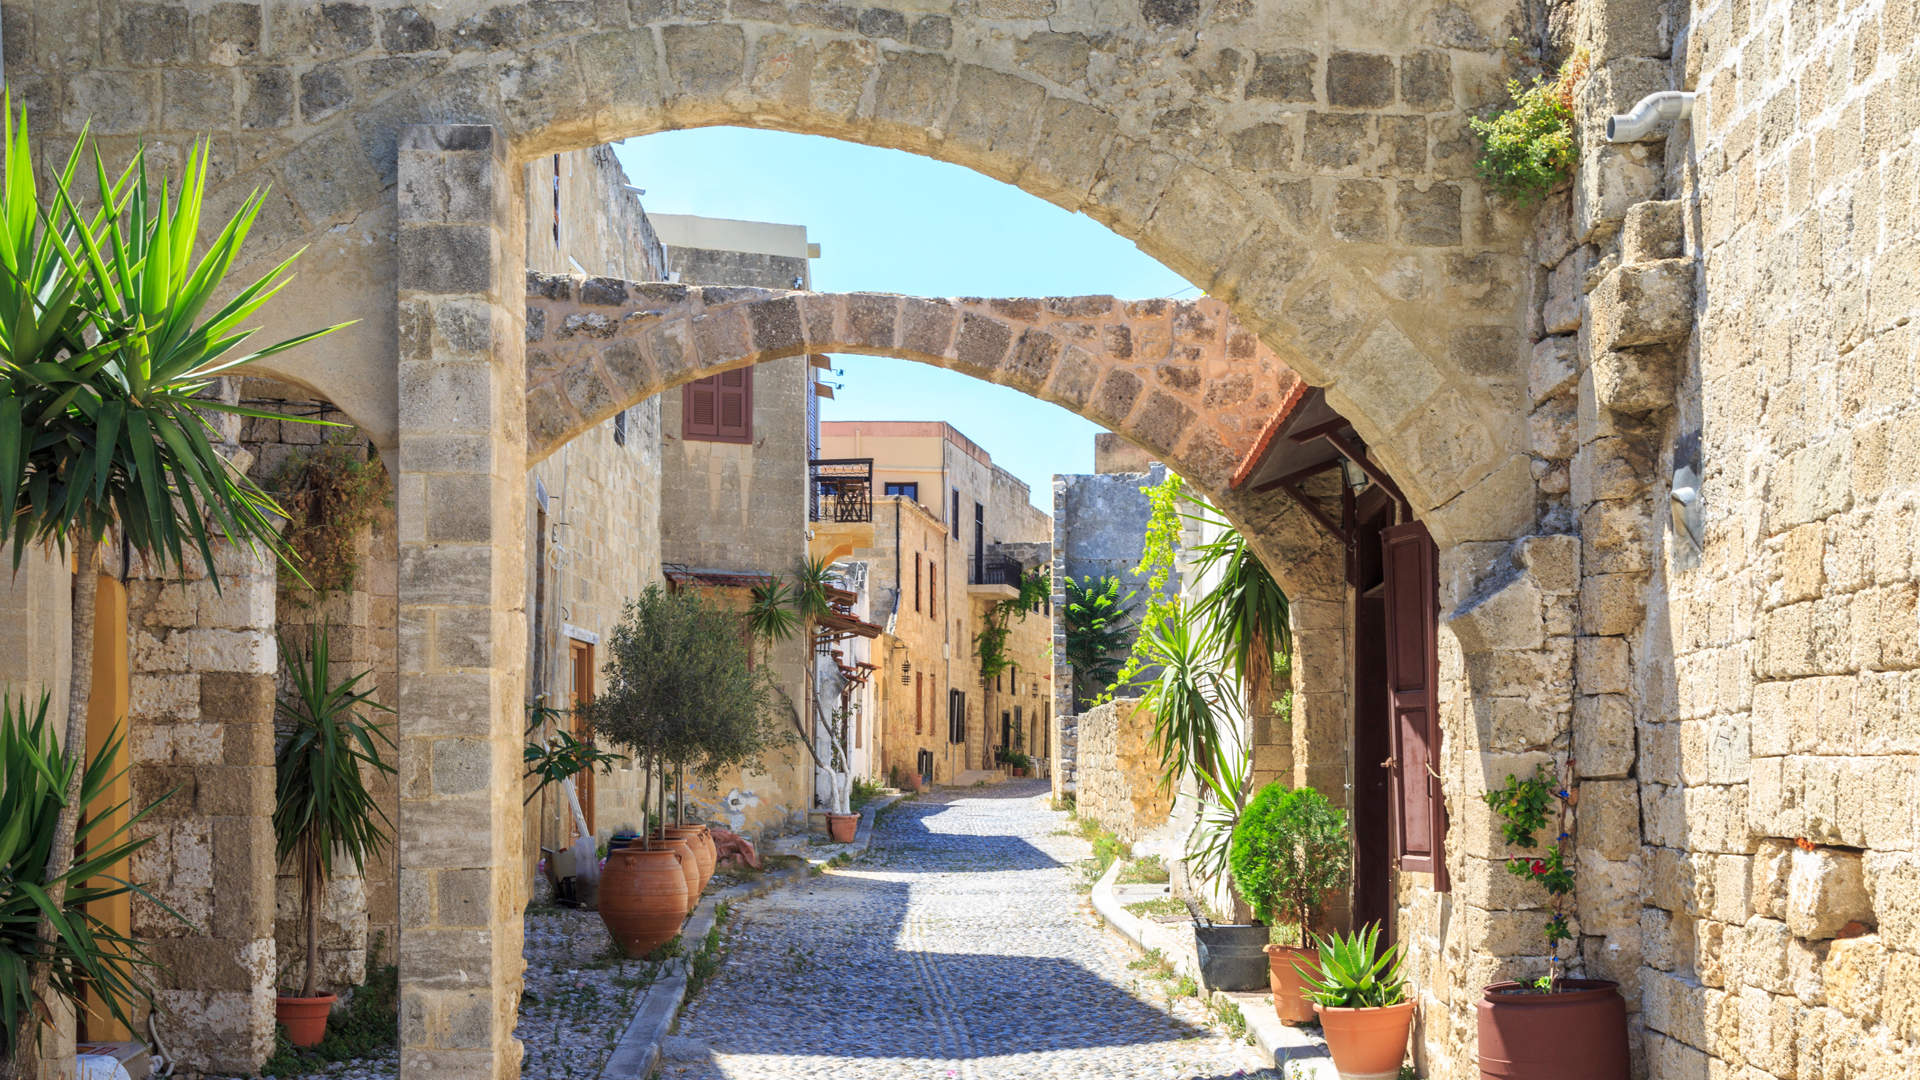 Historical Streets Of Old Town Rhodes Greece